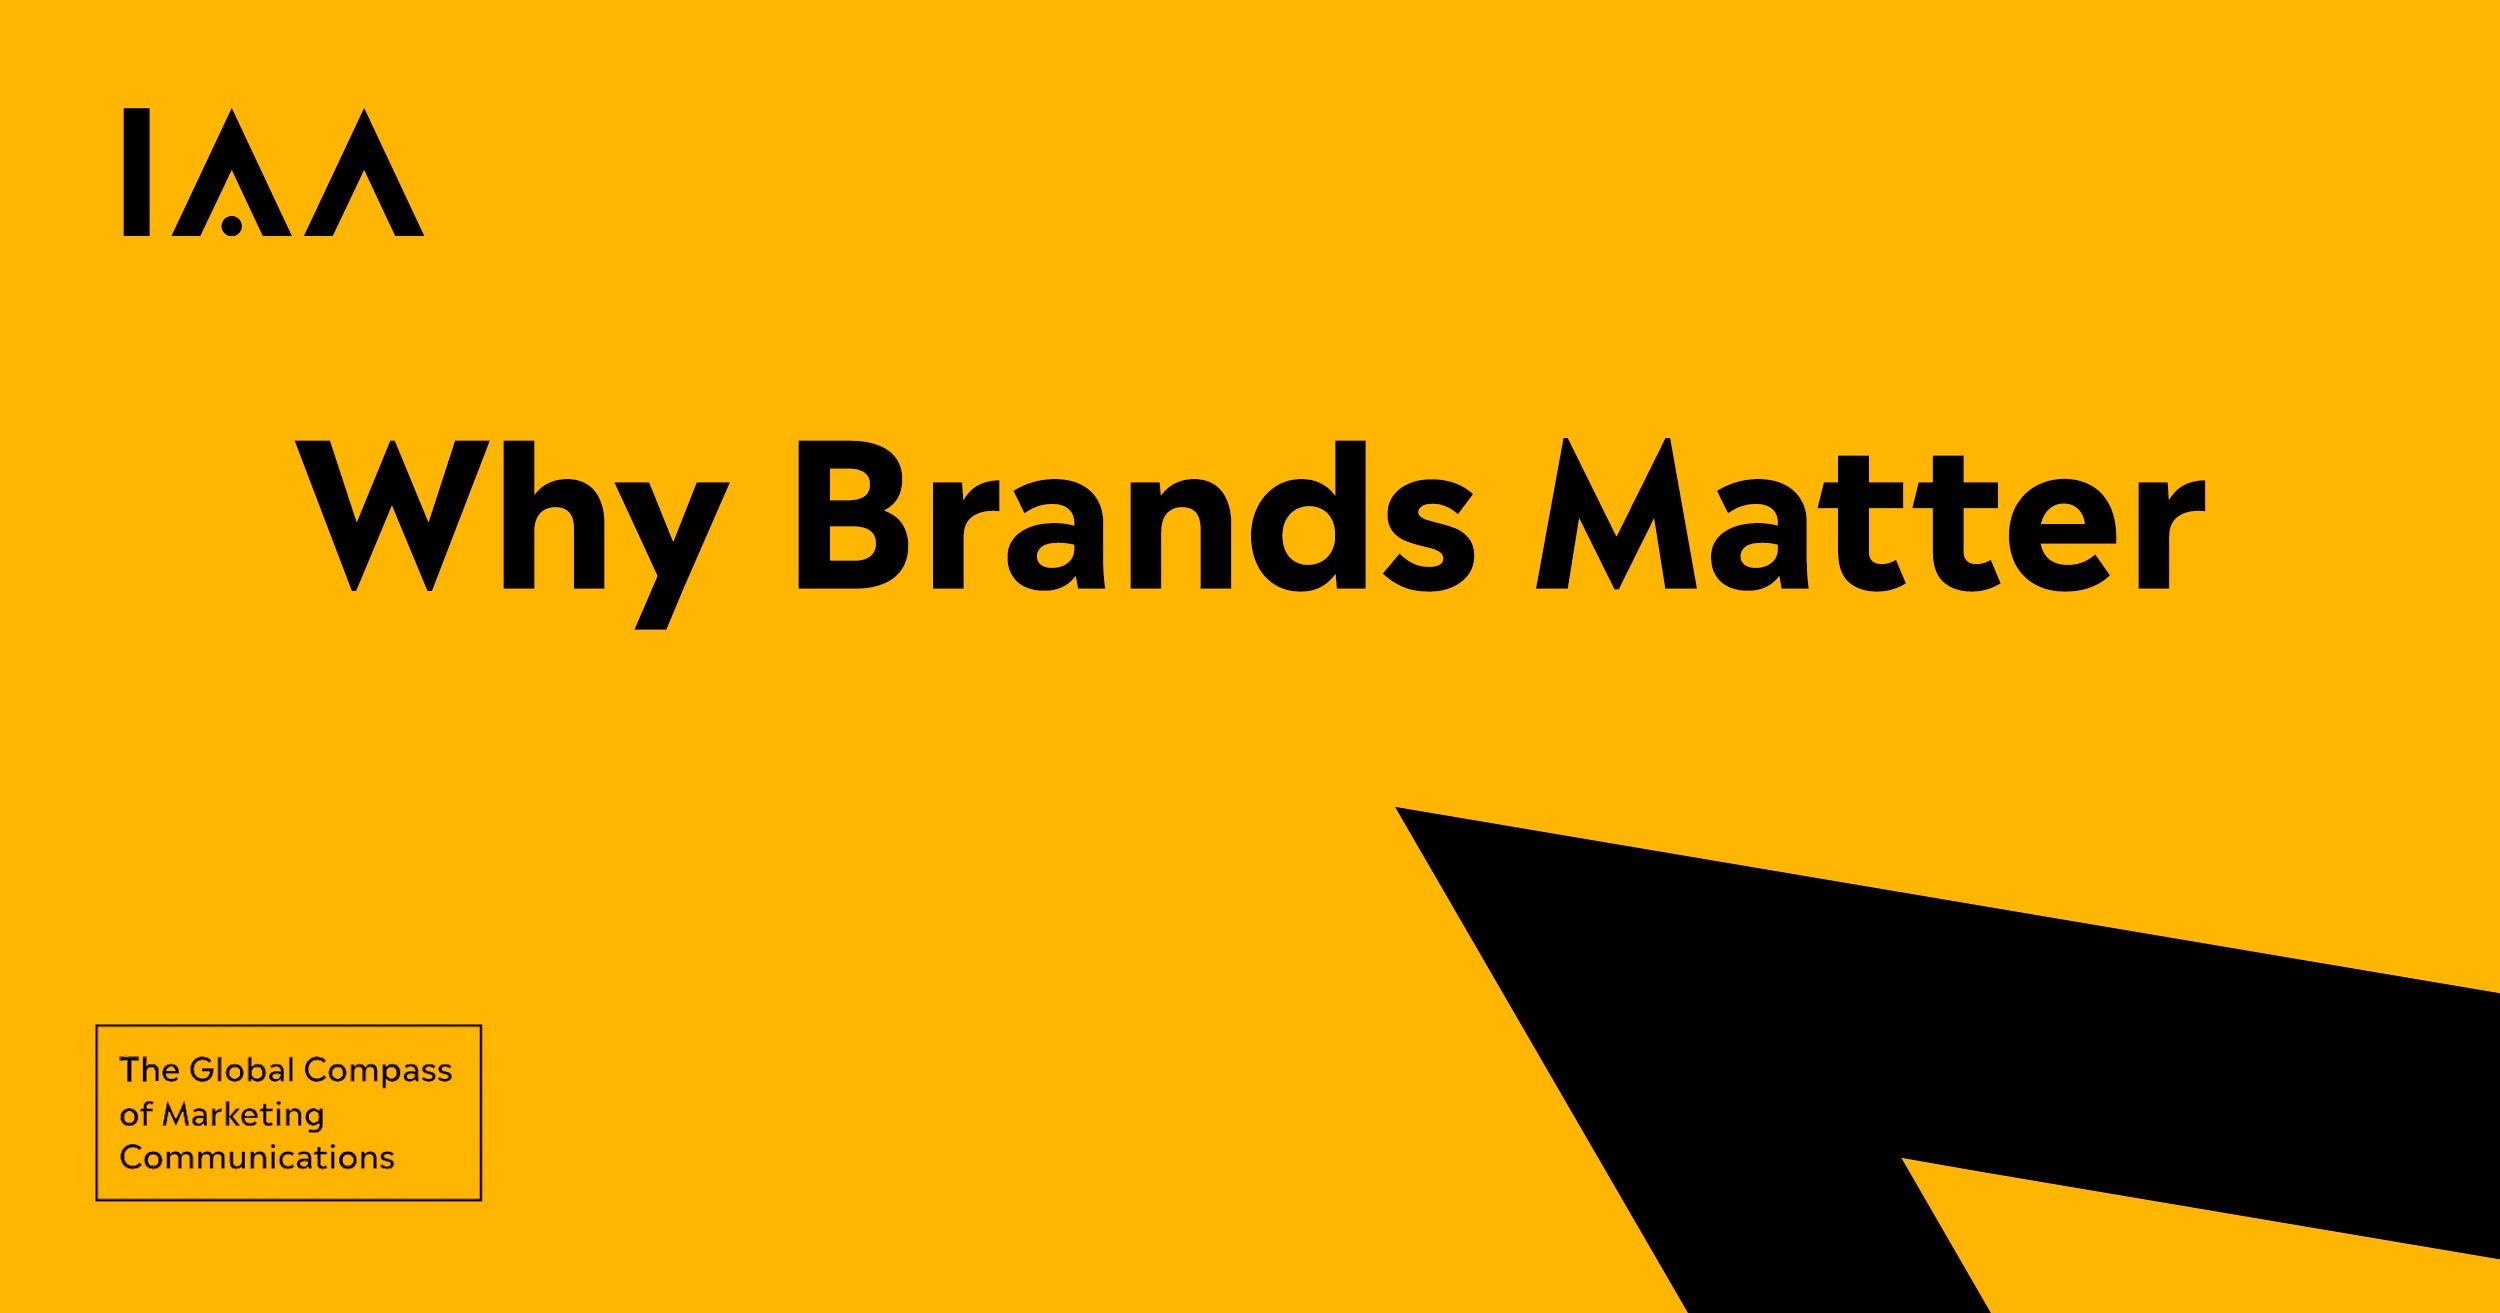 Brands Matter: US$22 Trillion wiped off company values in Q1 2020, but global study shows brands can fuel post-COVID economic recovery